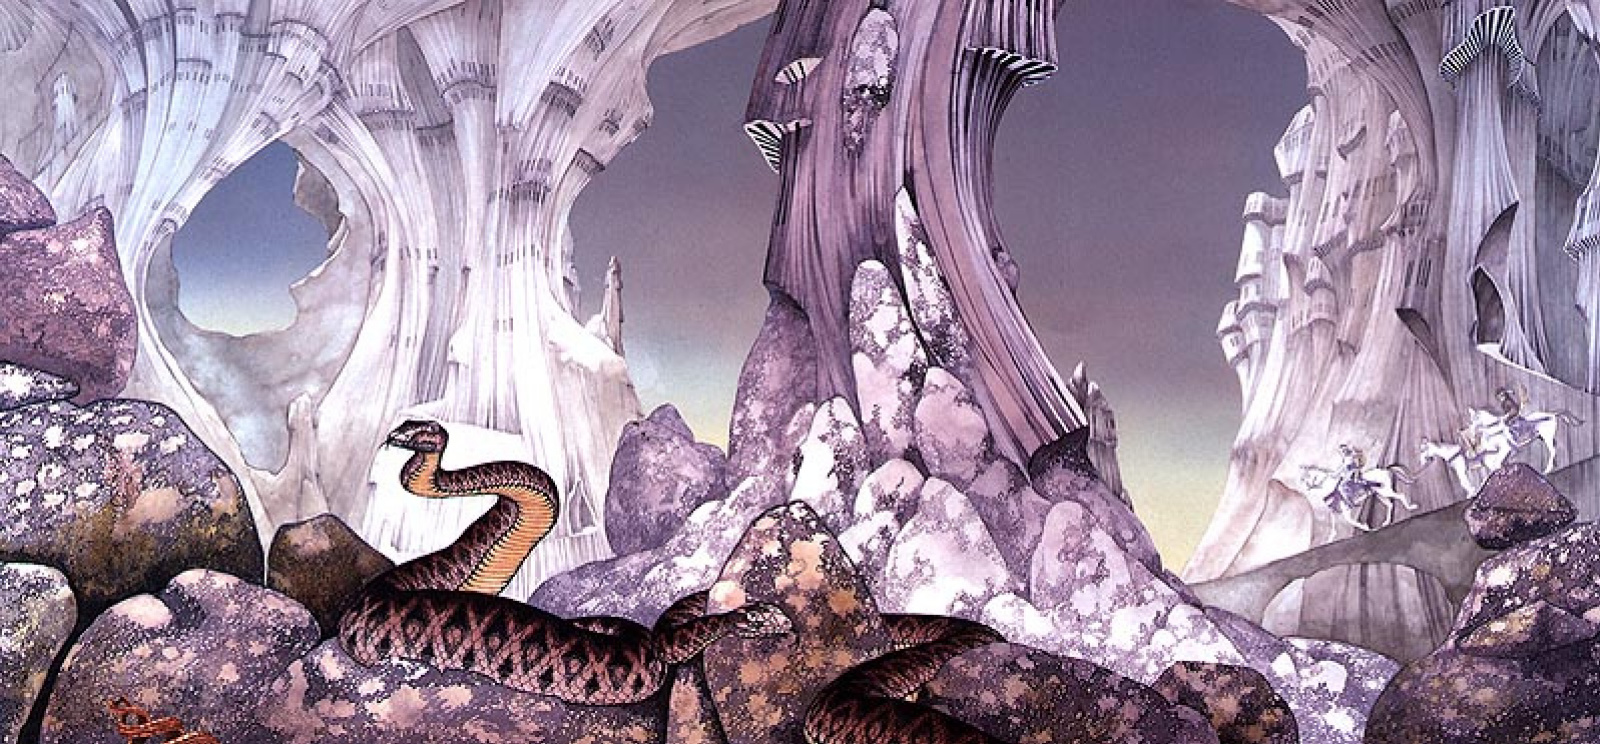 Plot 8 by Roger Dean: History, Analysis & Facts | Arthive